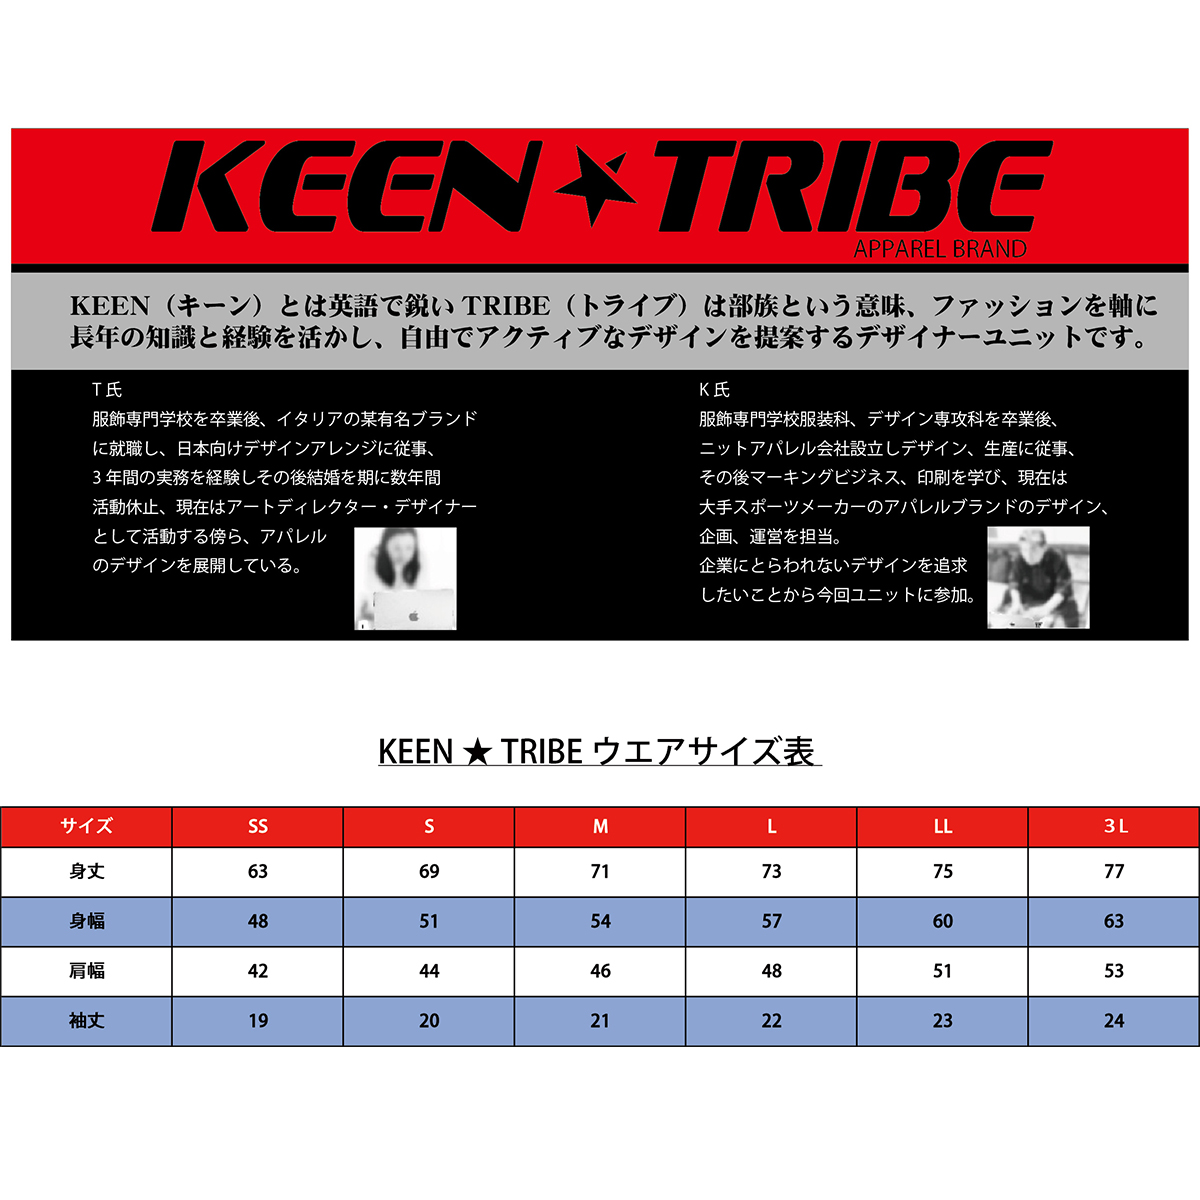 KEEN ★ TRIBE　KT-67(受注生産)